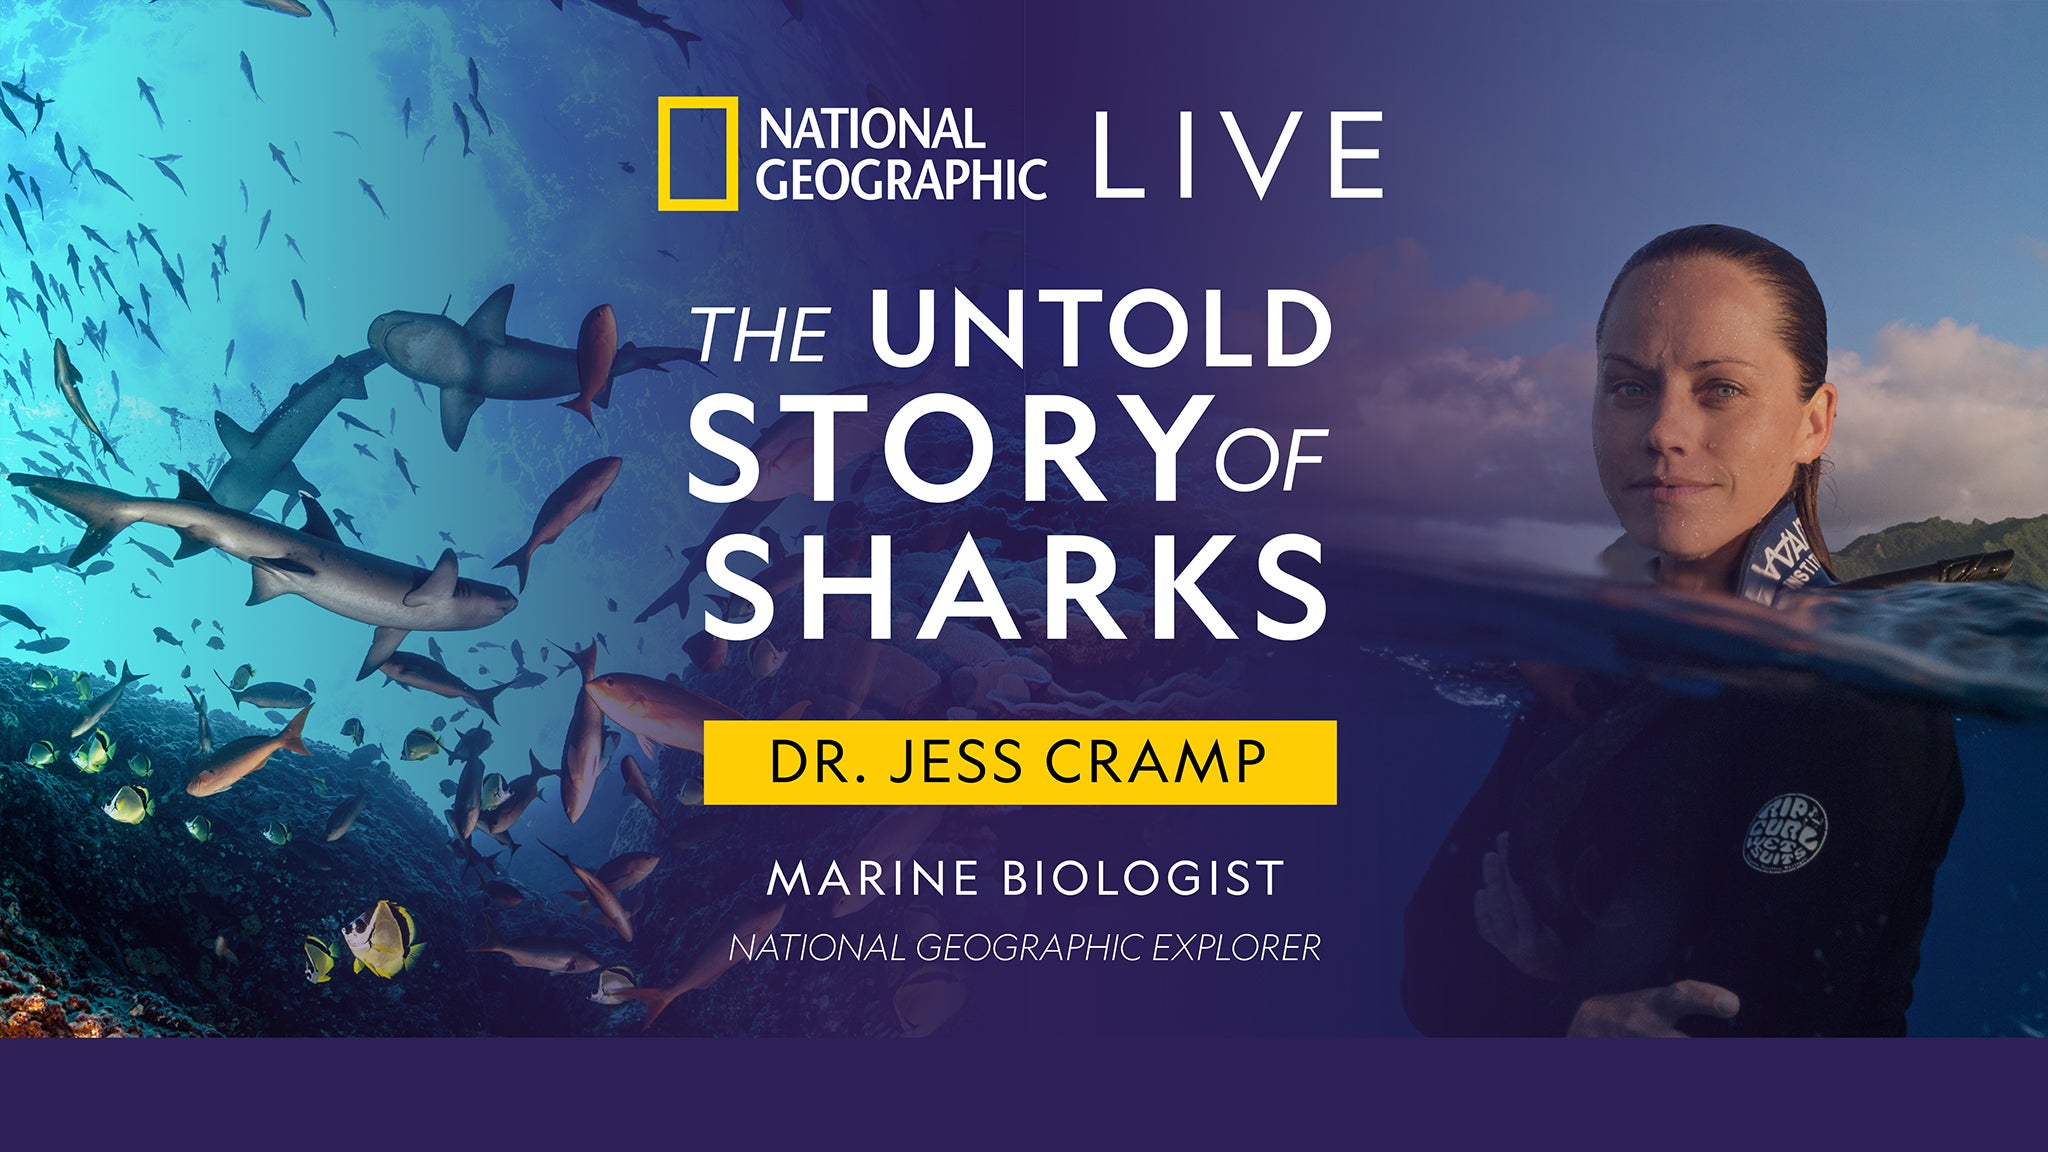 National Geographic Live - Untold Story of Sharks - STUDENT MATINEE